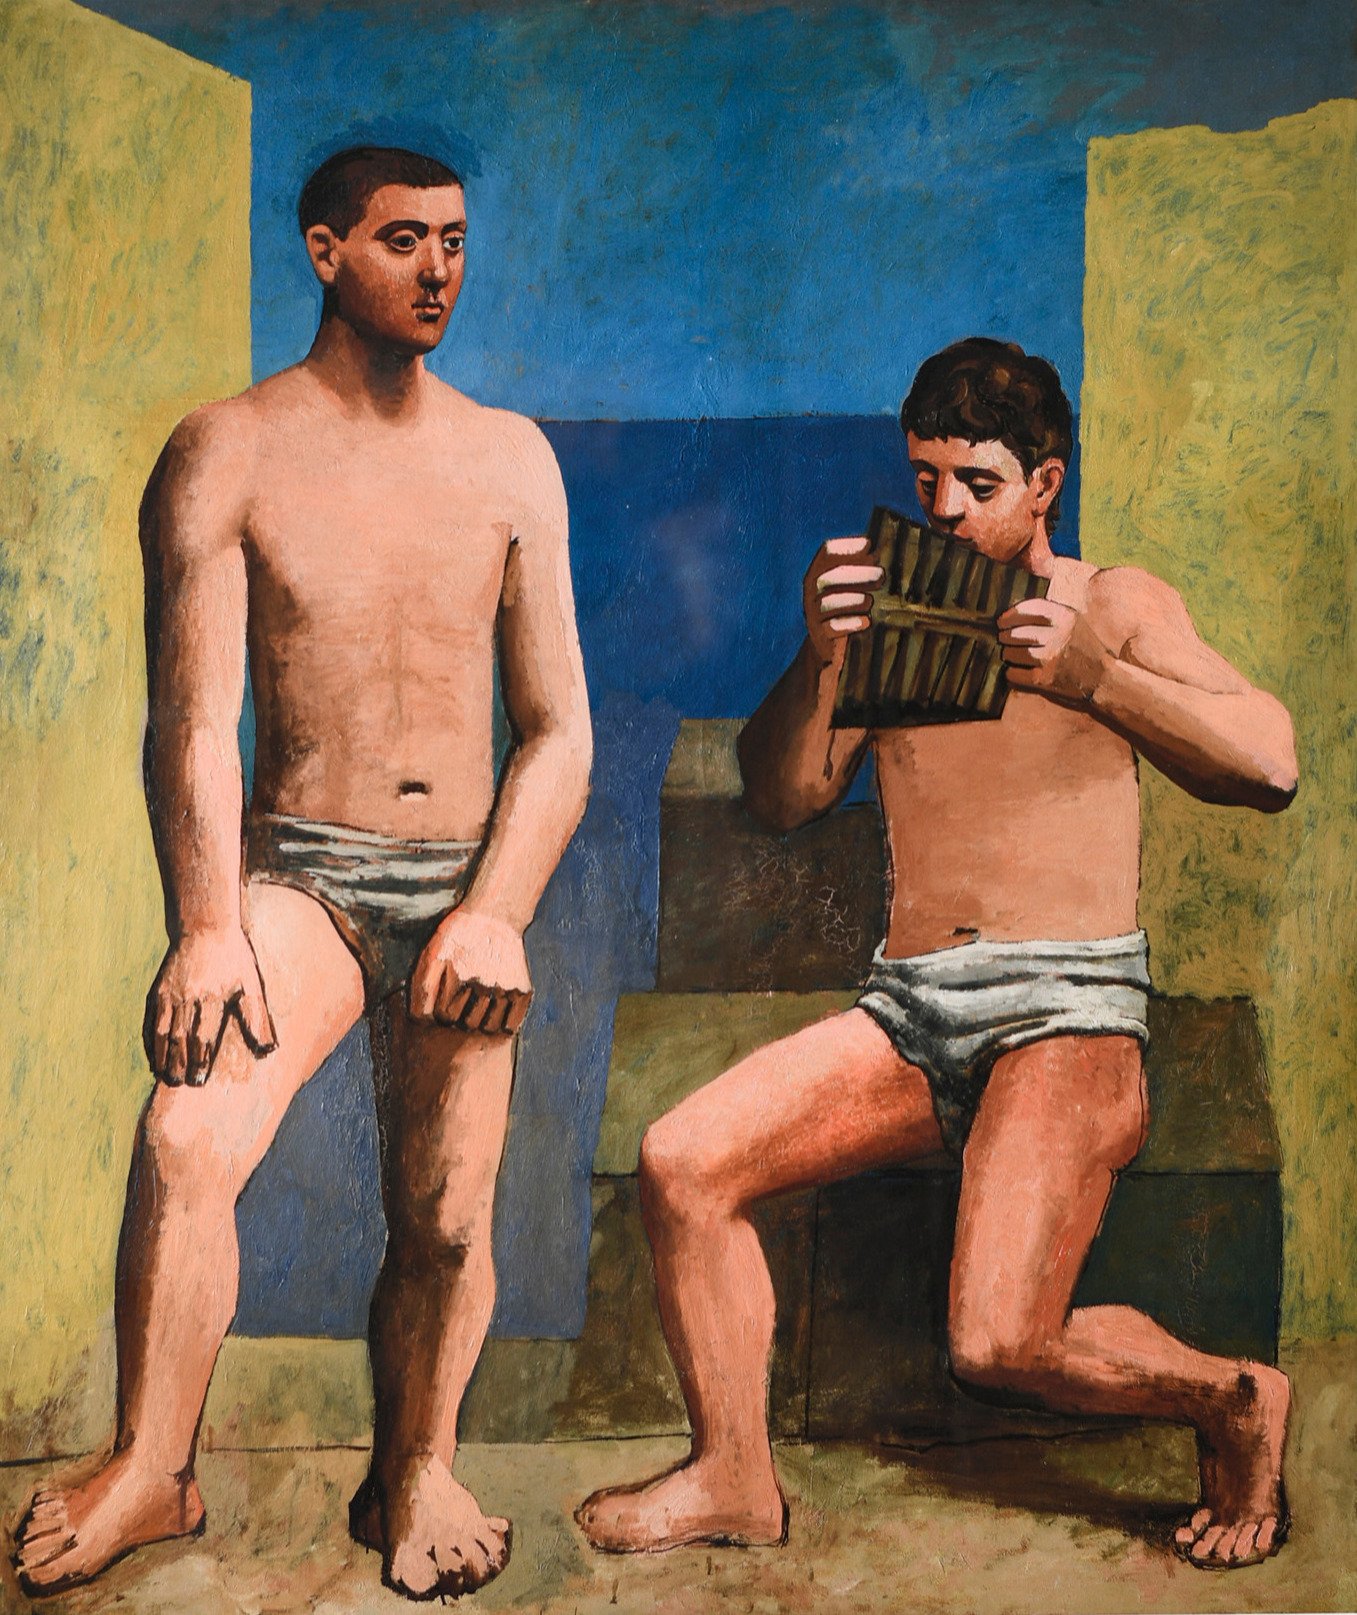 A rare limited edition of the 1923 PABLO PICASSO painting "The Pipes of Pan" was published as a